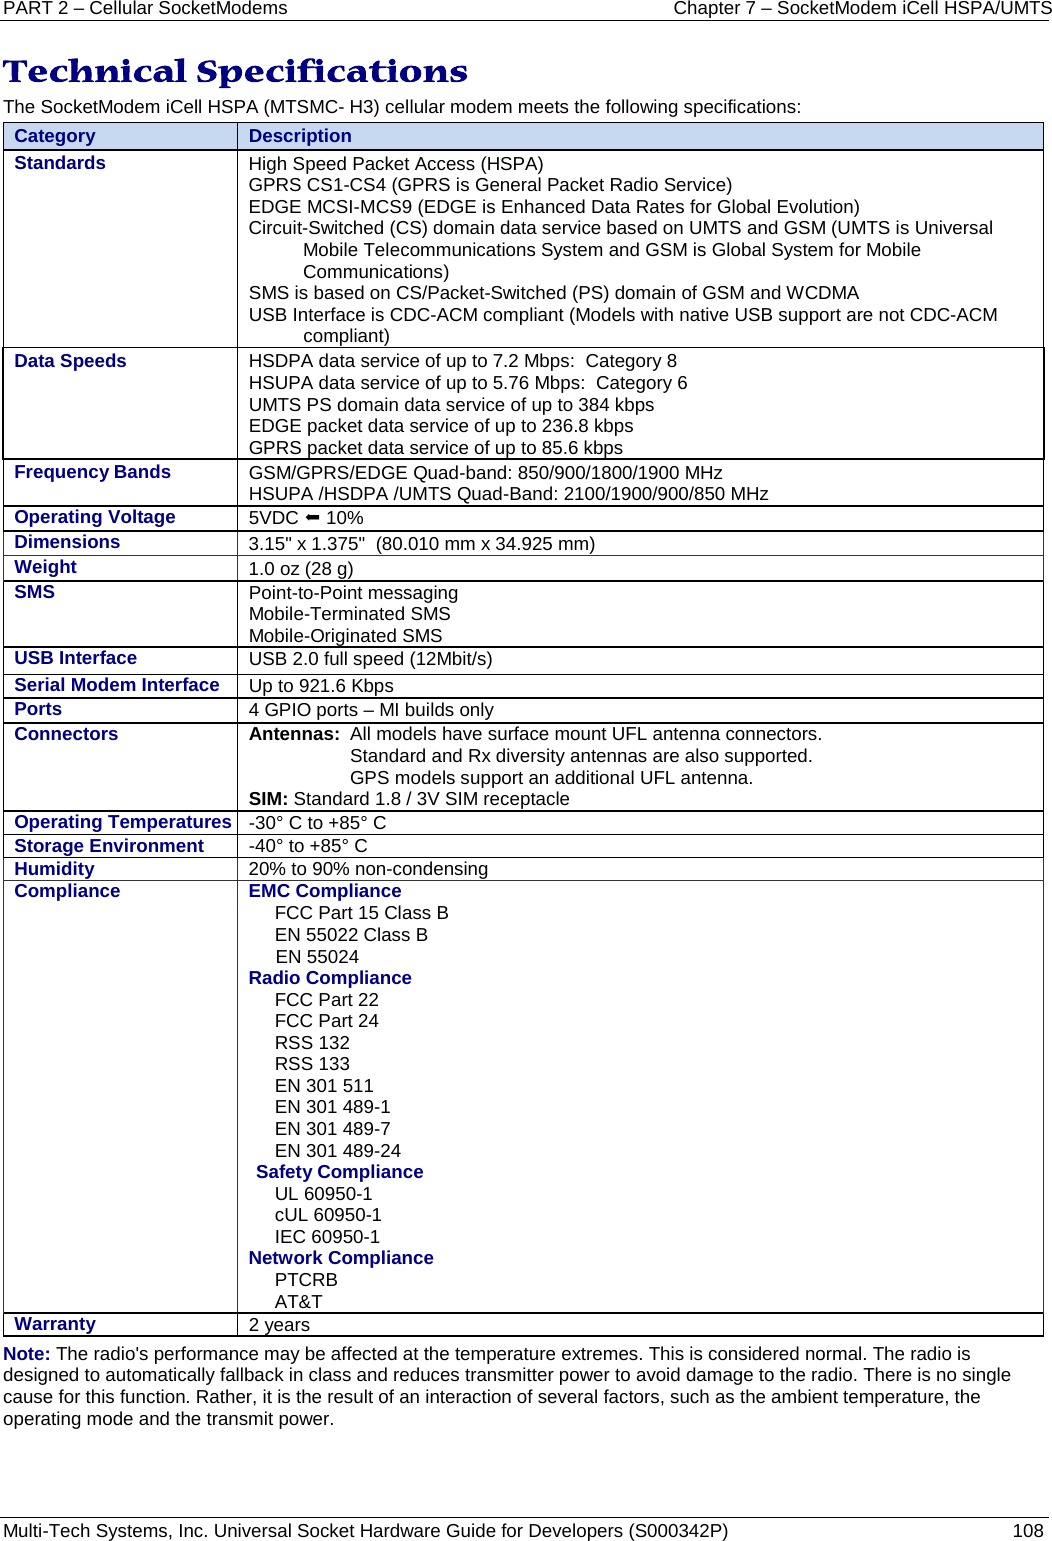 PART 2 – Cellular SocketModems Chapter 7 – SocketModem iCell HSPA/UMTS Multi-Tech Systems, Inc. Universal Socket Hardware Guide for Developers (S000342P)  108  Technical Specifications   The SocketModem iCell HSPA (MTSMC- H3) cellular modem meets the following specifications:  Category Description Standards High Speed Packet Access (HSPA) GPRS CS1-CS4 (GPRS is General Packet Radio Service) EDGE MCSI-MCS9 (EDGE is Enhanced Data Rates for Global Evolution) Circuit-Switched (CS) domain data service based on UMTS and GSM (UMTS is Universal Mobile Telecommunications System and GSM is Global System for Mobile Communications) SMS is based on CS/Packet-Switched (PS) domain of GSM and WCDMA USB Interface is CDC-ACM compliant (Models with native USB support are not CDC-ACM compliant)  Data Speeds HSDPA data service of up to 7.2 Mbps:  Category 8  HSUPA data service of up to 5.76 Mbps:  Category 6 UMTS PS domain data service of up to 384 kbps EDGE packet data service of up to 236.8 kbps GPRS packet data service of up to 85.6 kbps Frequency Bands GSM/GPRS/EDGE Quad-band: 850/900/1800/1900 MHz HSUPA /HSDPA /UMTS Quad-Band: 2100/1900/900/850 MHz  Operating Voltage  5VDC  10%      Dimensions 3.15&quot; x 1.375&quot;  (80.010 mm x 34.925 mm) Weight 1.0 oz (28 g) SMS  Point-to-Point messaging Mobile-Terminated SMS Mobile-Originated SMS USB Interface USB 2.0 full speed (12Mbit/s)  Serial Modem Interface Up to 921.6 Kbps Ports 4 GPIO ports – MI builds only Connectors Antennas: All models have surface mount UFL antenna connectors.    Standard and Rx diversity antennas are also supported.    GPS models support an additional UFL antenna. SIM: Standard 1.8 / 3V SIM receptacle Operating Temperatures -30° C to +85° C    Storage Environment -40° to +85° C  Humidity 20% to 90% non-condensing Compliance EMC Compliance  FCC Part 15 Class B EN 55022 Class B EN 55024 Radio Compliance FCC Part 22 FCC Part 24 RSS 132 RSS 133 EN 301 511 EN 301 489-1 EN 301 489-7 EN 301 489-24 Safety Compliance UL 60950-1 cUL 60950-1 IEC 60950-1 Network Compliance  PTCRB AT&amp;T Warranty 2 years Note: The radio&apos;s performance may be affected at the temperature extremes. This is considered normal. The radio is designed to automatically fallback in class and reduces transmitter power to avoid damage to the radio. There is no single cause for this function. Rather, it is the result of an interaction of several factors, such as the ambient temperature, the operating mode and the transmit power.   